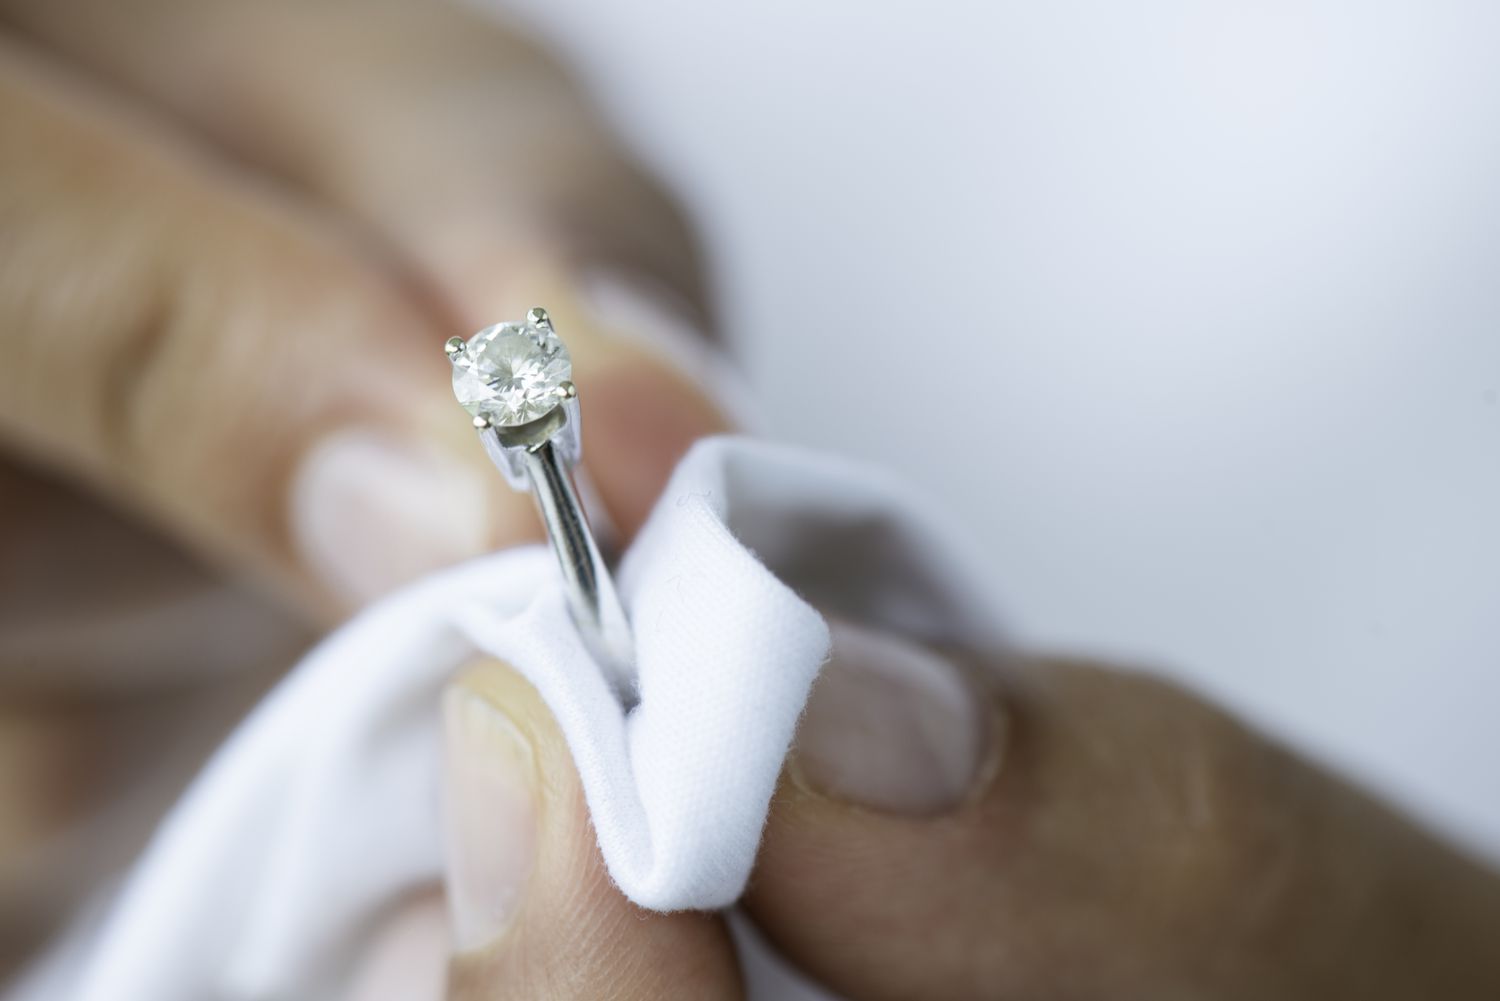 Cleaning Silver Diamond Ring With White Cloth